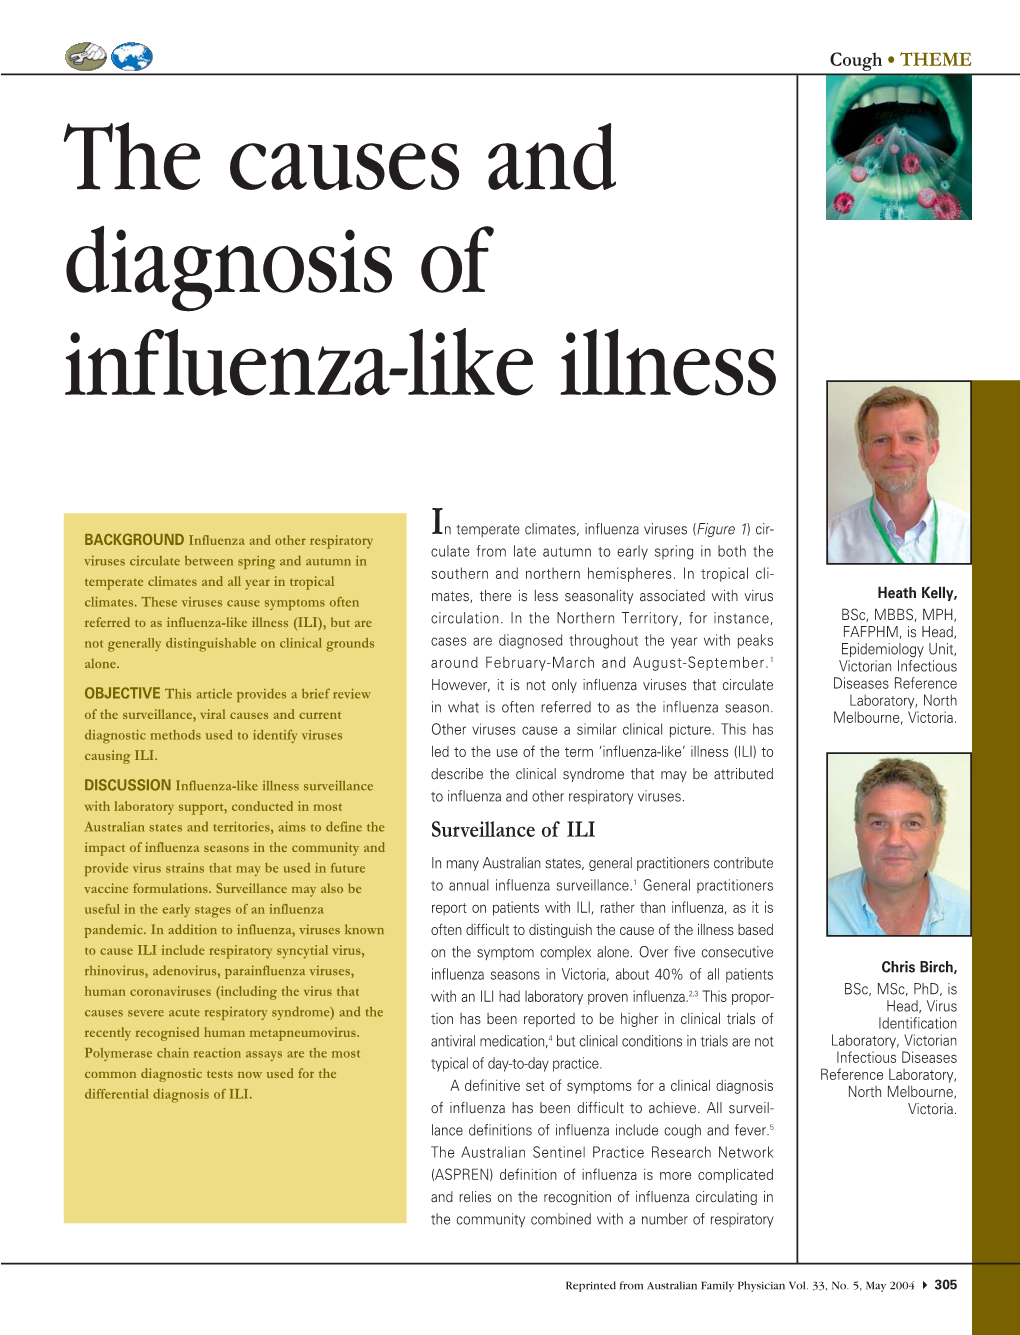 The Causes and Diagnosis of Influenza-Like Illness